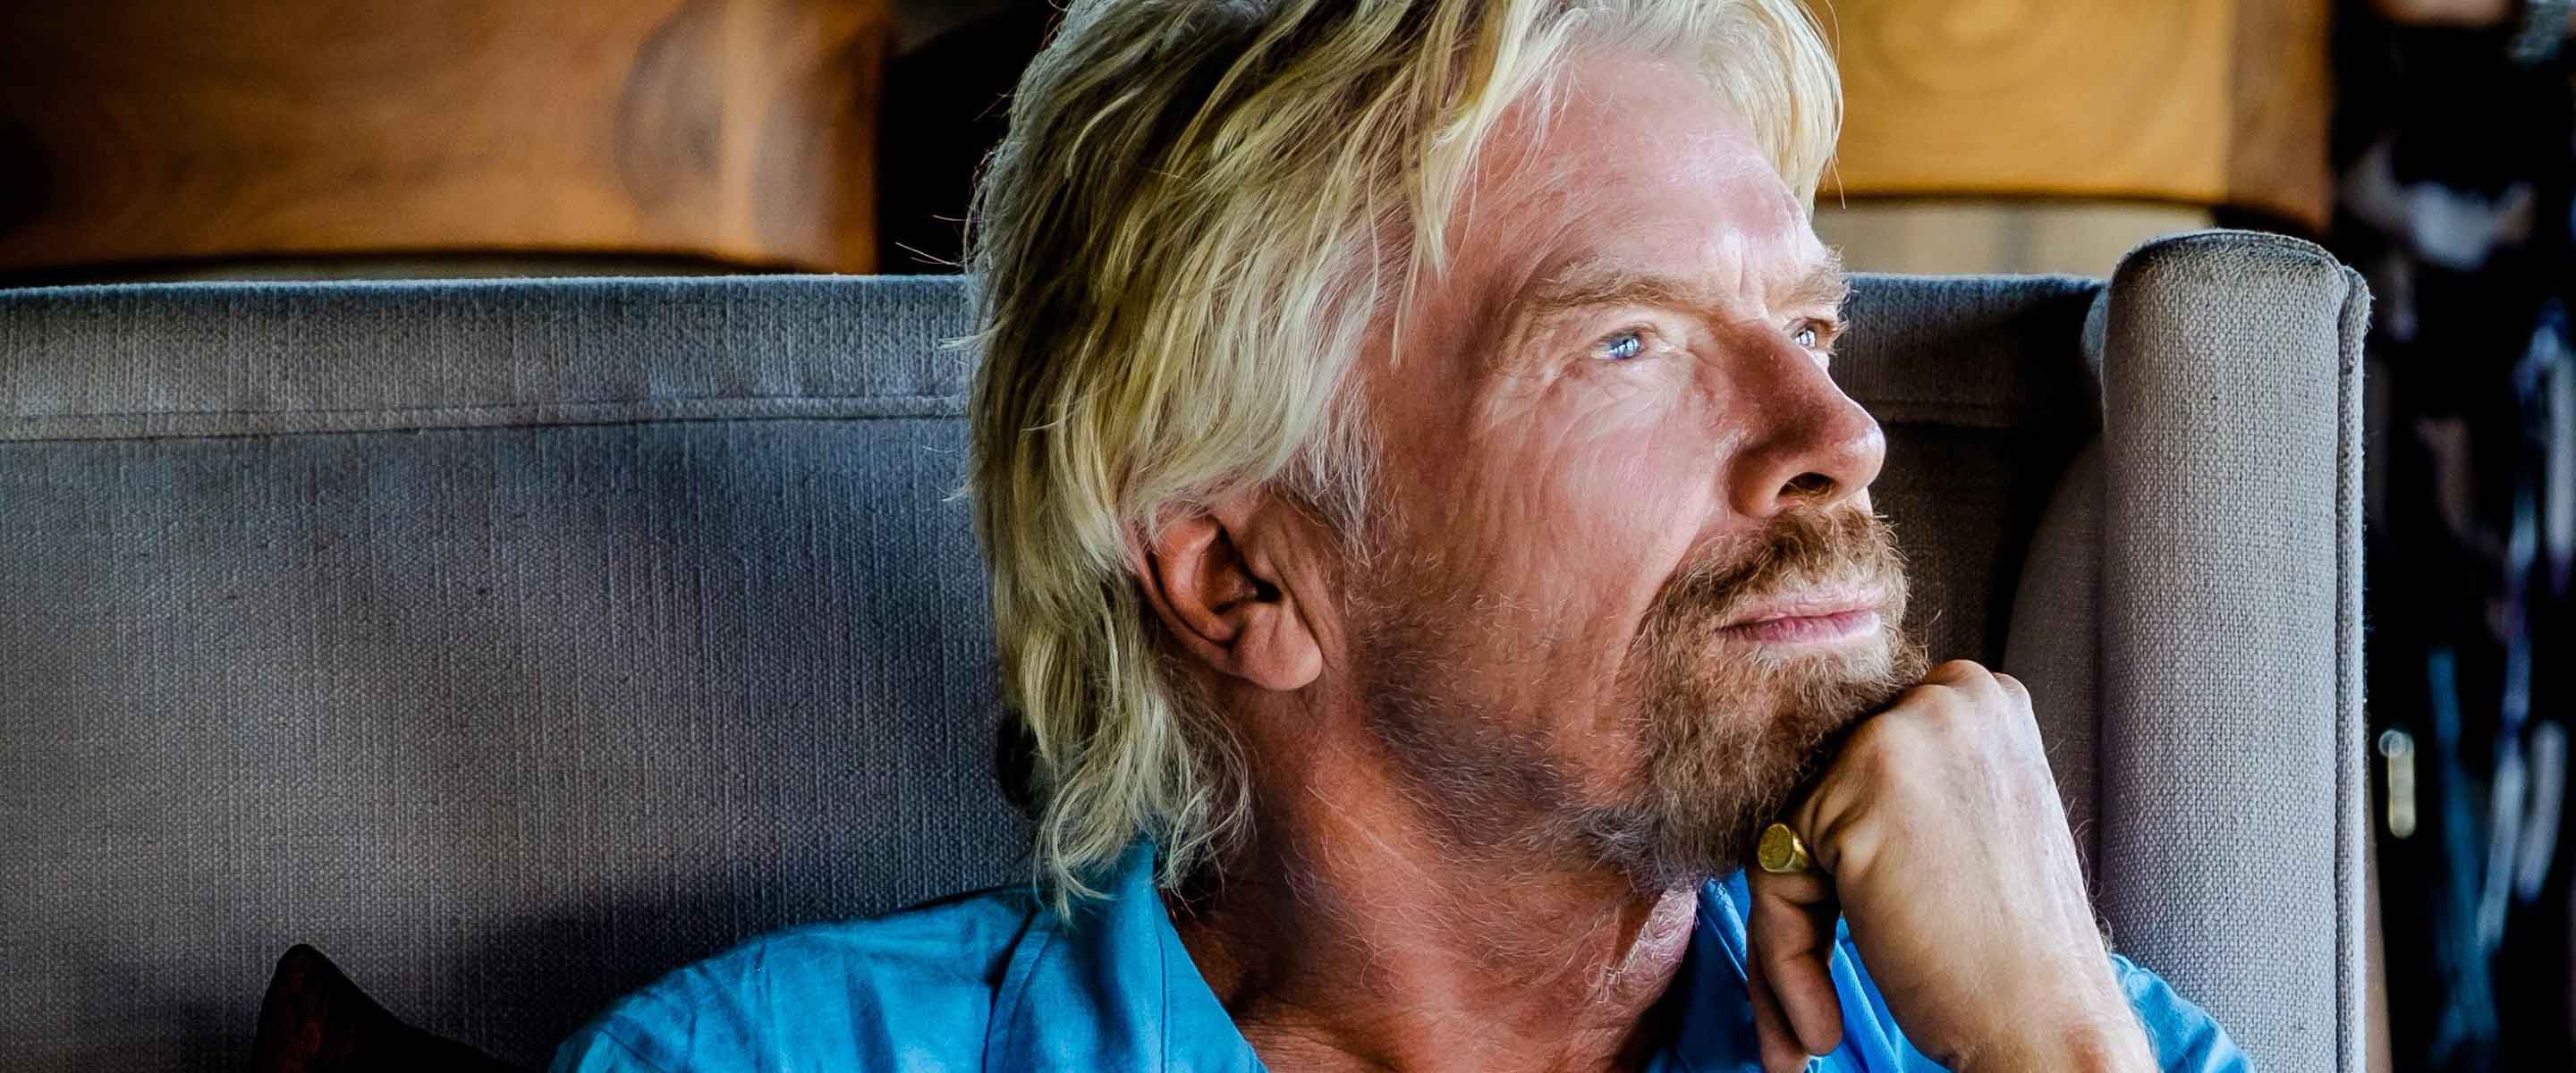 Sir Richard Branson sits in an armchair looking deep in thought with his chin resting on his hand. He is wearing a light blue, casual button down shirt